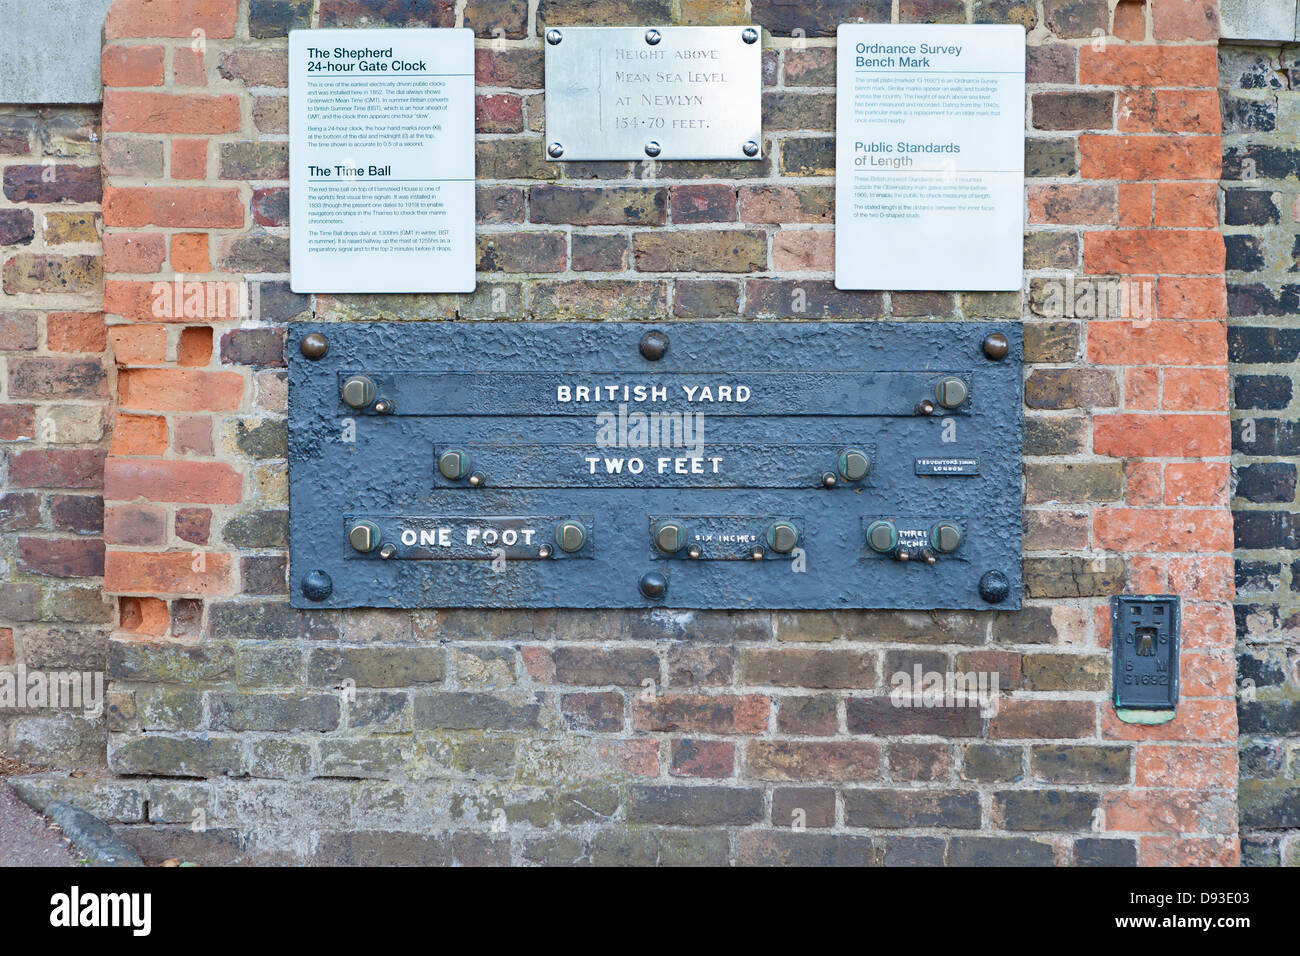 Imperial measurements, royal observatory, Greenwich, London UK Stock Photo